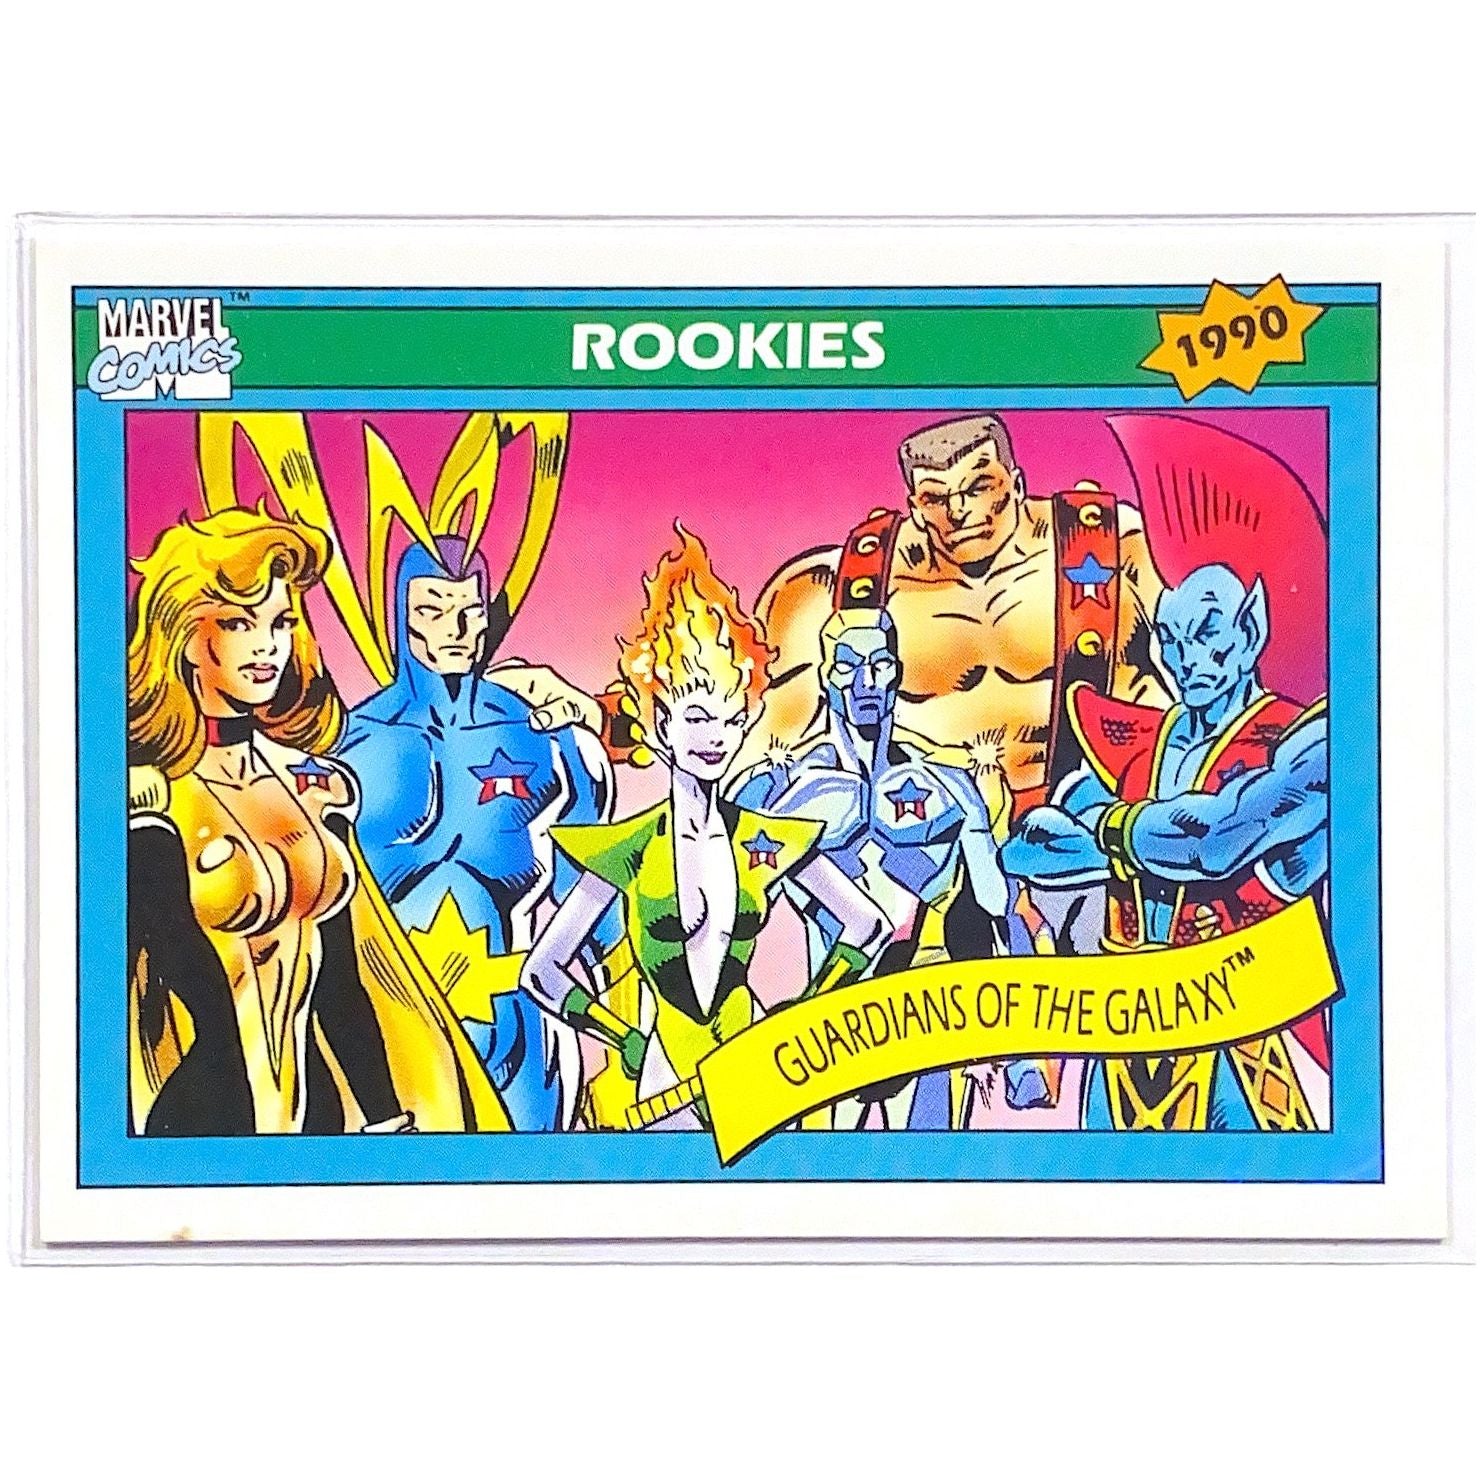  1990 Impel Marvel Comics Rookies Guardians of the Galaxy #84  Local Legends Cards & Collectibles